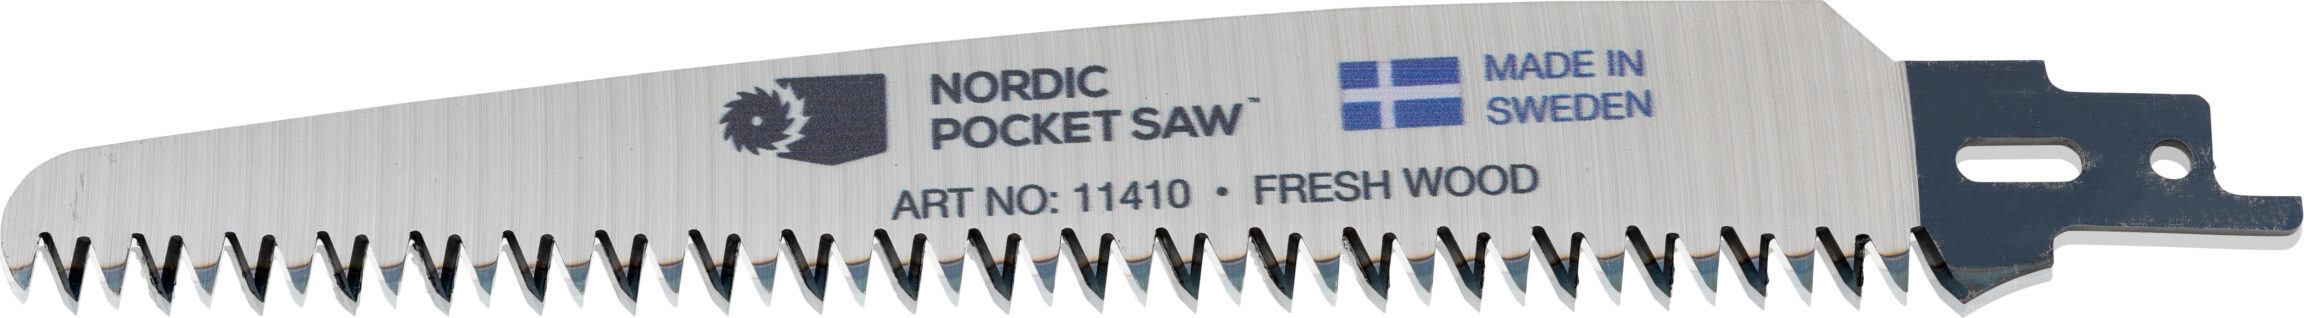 Nordic Pocket Saw Extra Saw Blade For Fresh Wood Silver OneSize, Silver